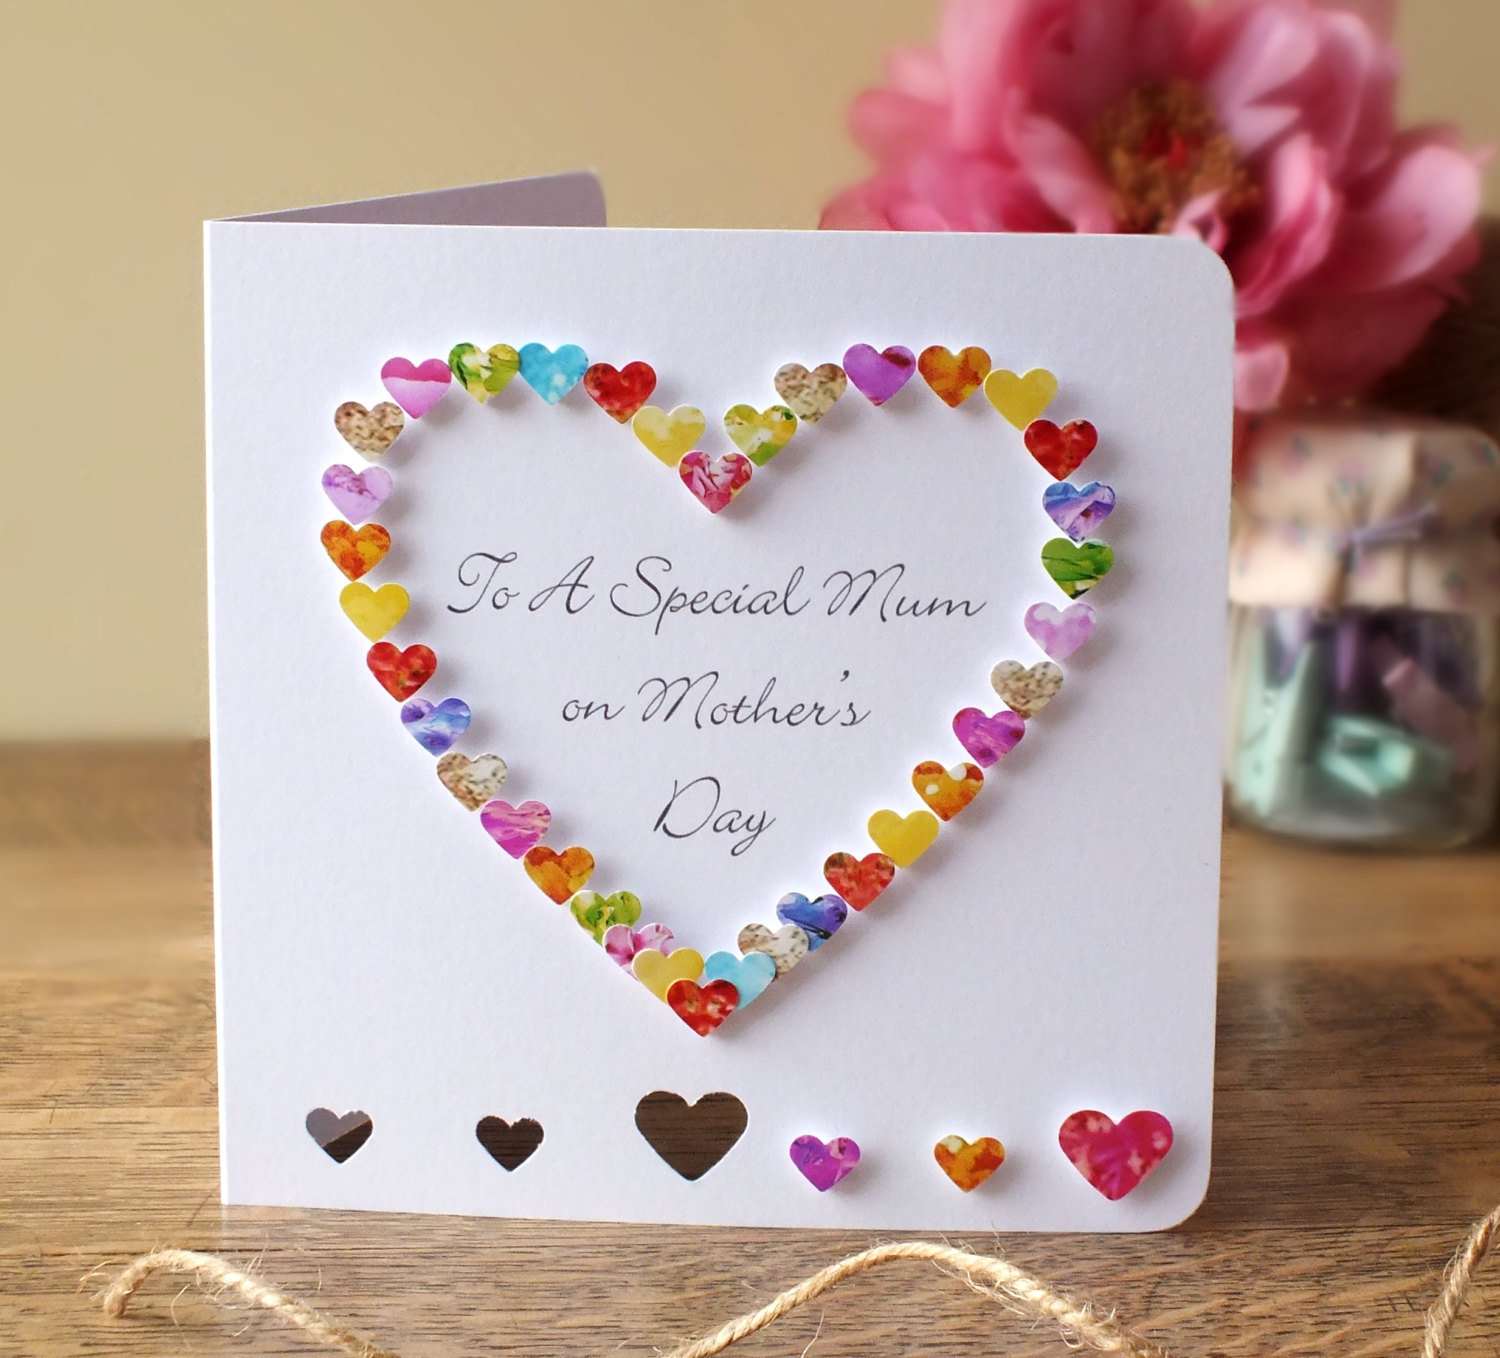 Beautiful Handmade Greeting Cards For Mother's Day